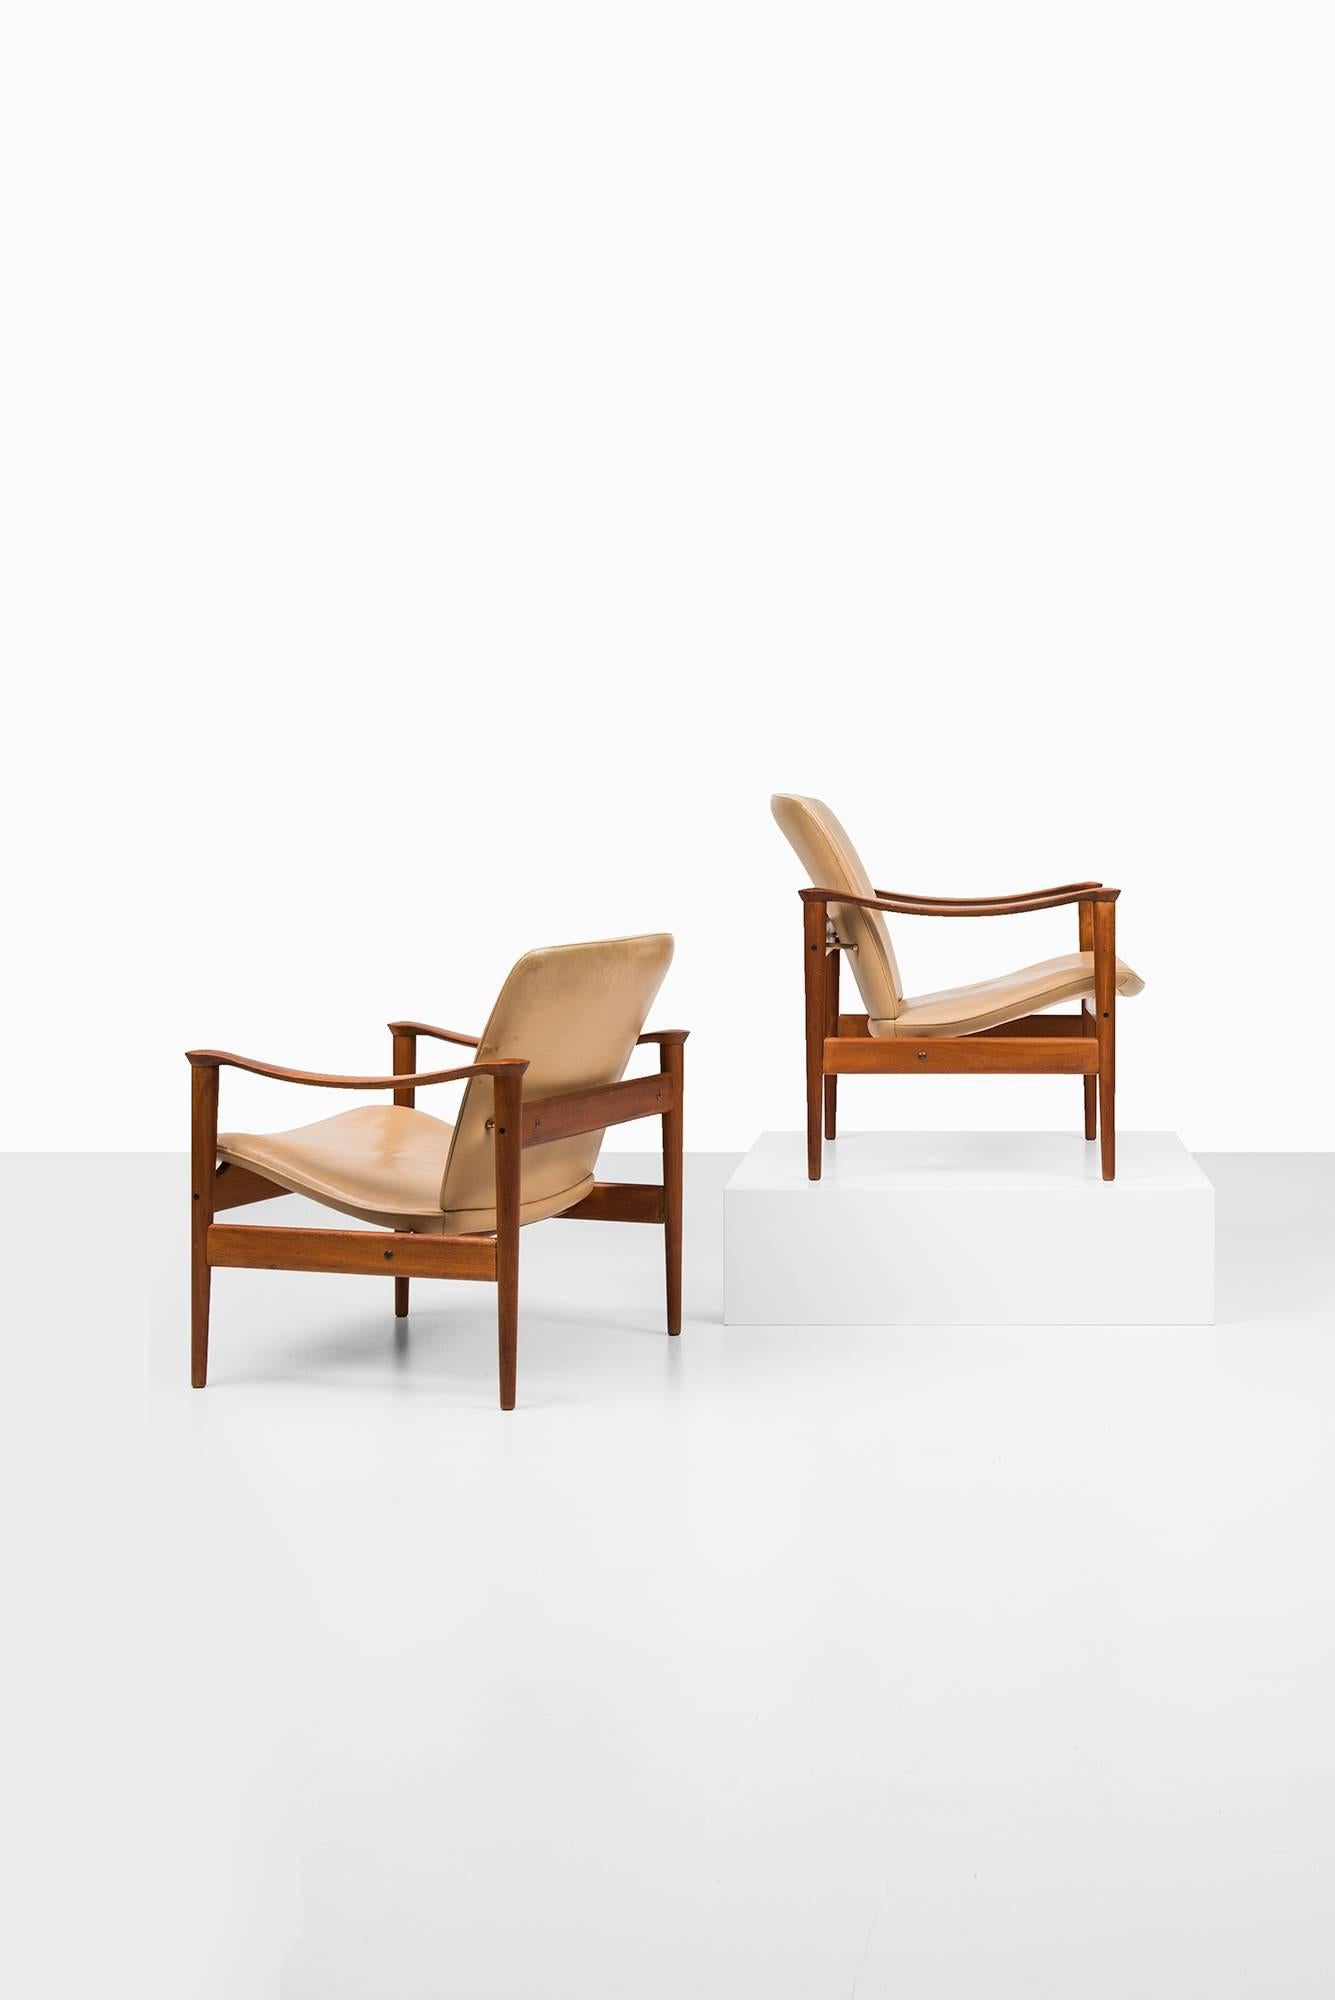 Rare pair of easy chairs model 711 designed by Fredrik Kayser. Produced by Vatne Møbler in Norway.